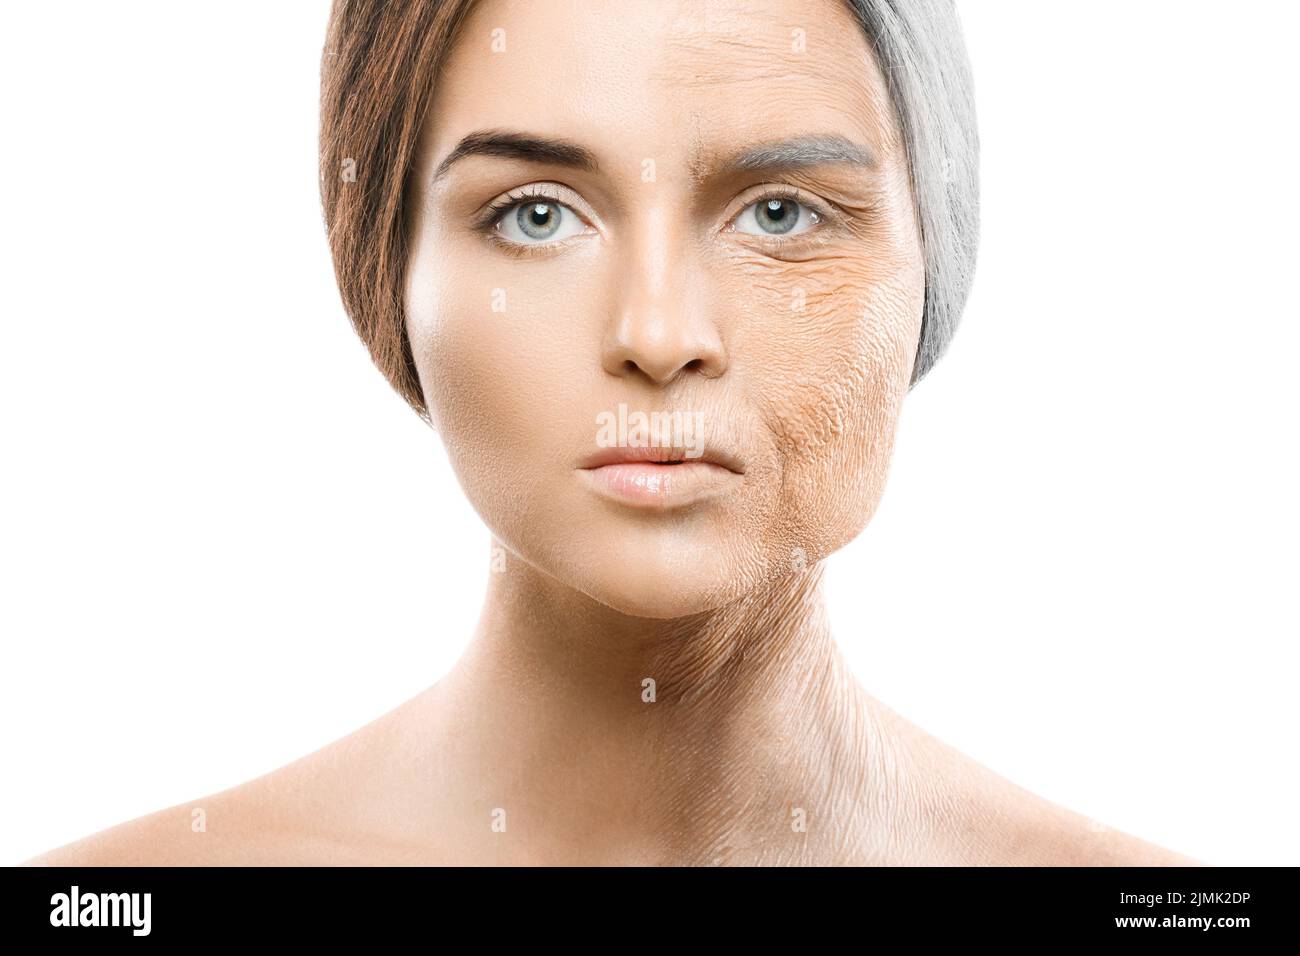 Aging concept. Young and old face comparision. Stock Photo